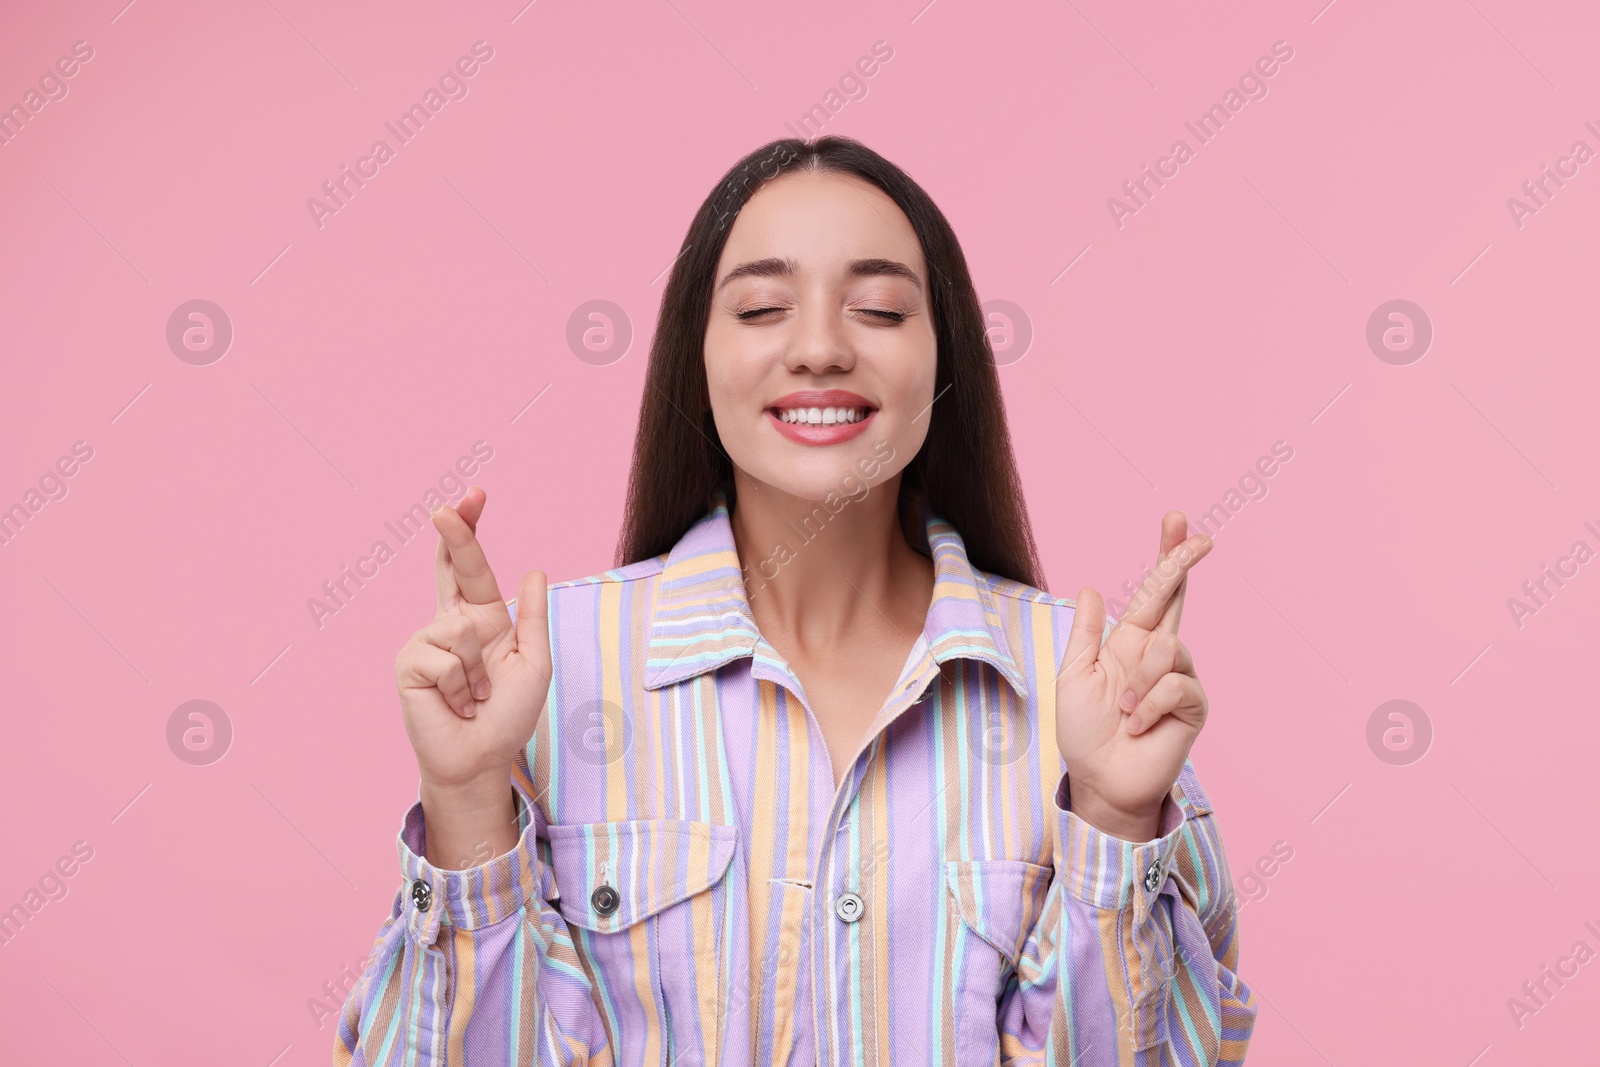 Photo of Happy woman crossing her fingers on pink background